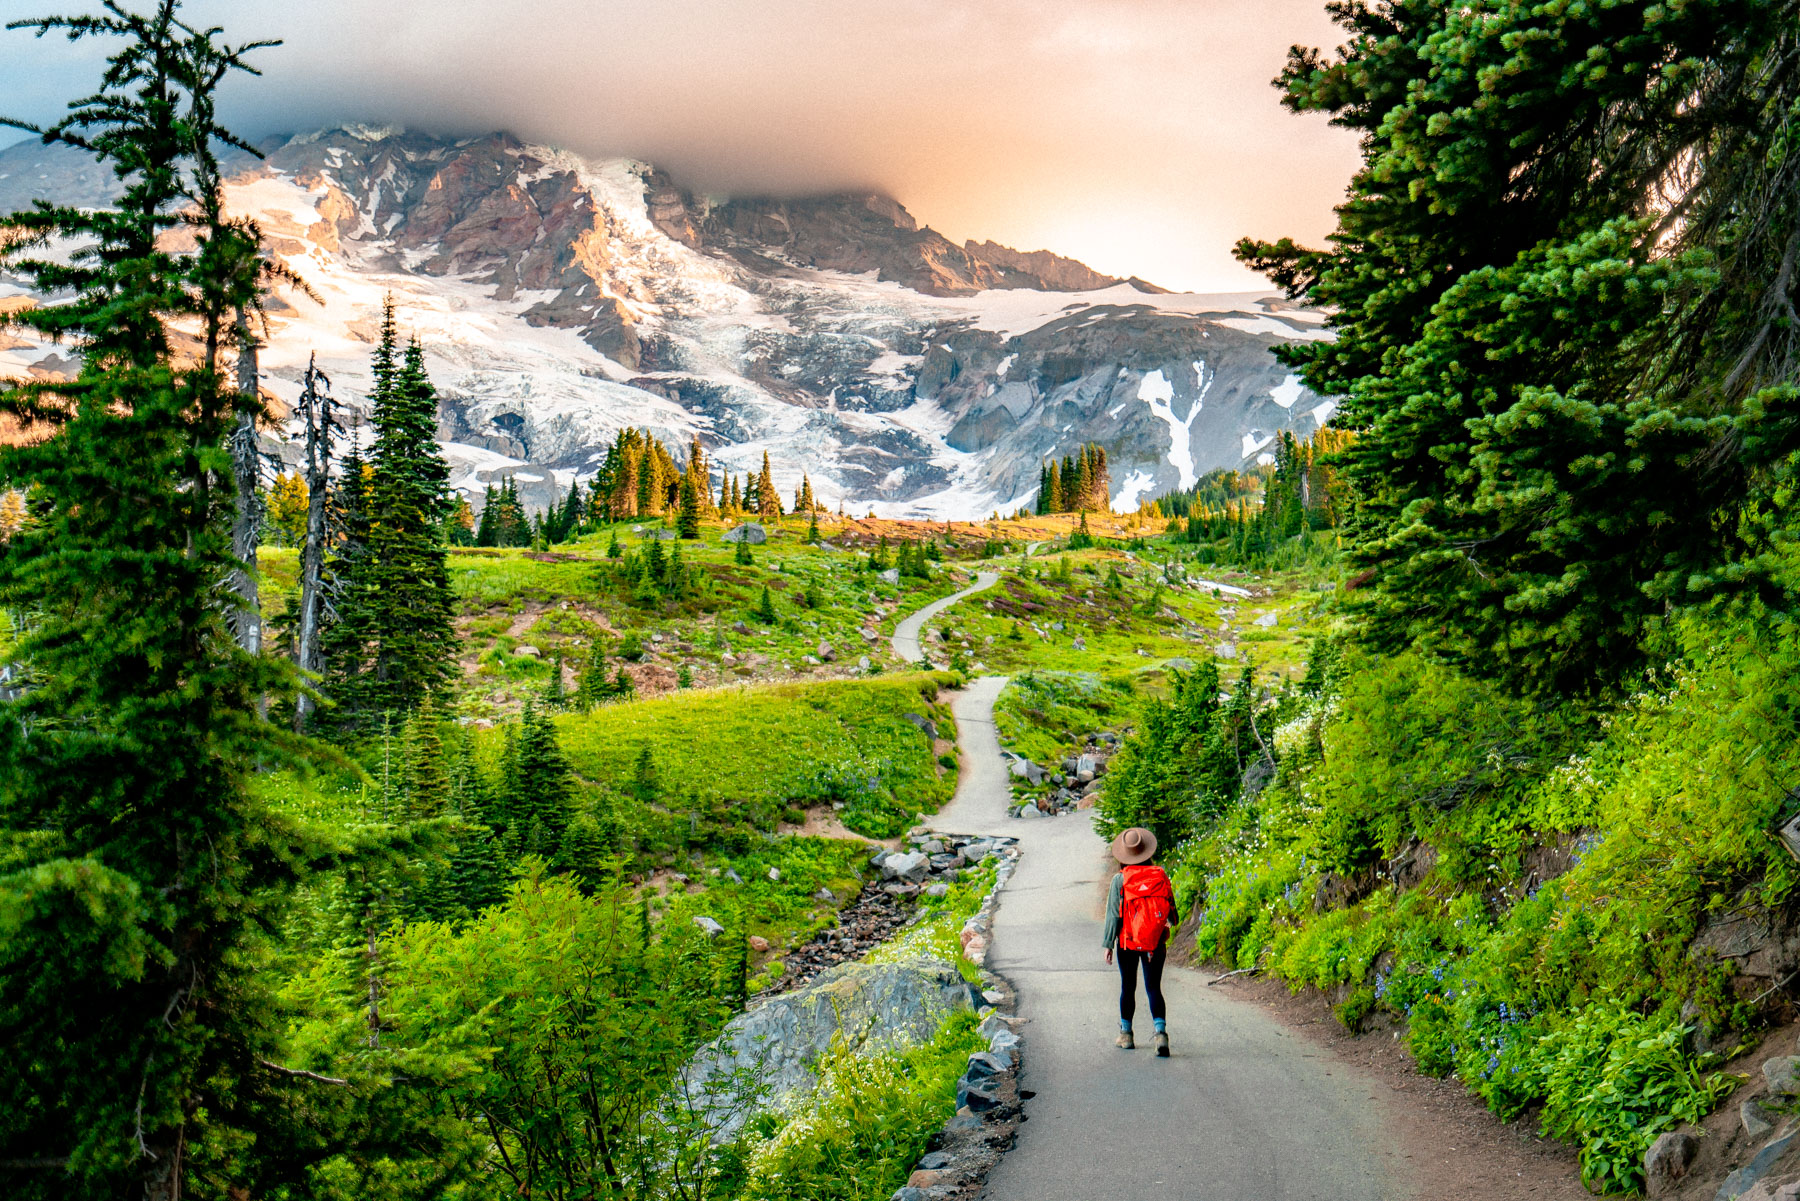 10 JAW-DROPPING Things to Do at MT. RAINIER NATIONAL PARK